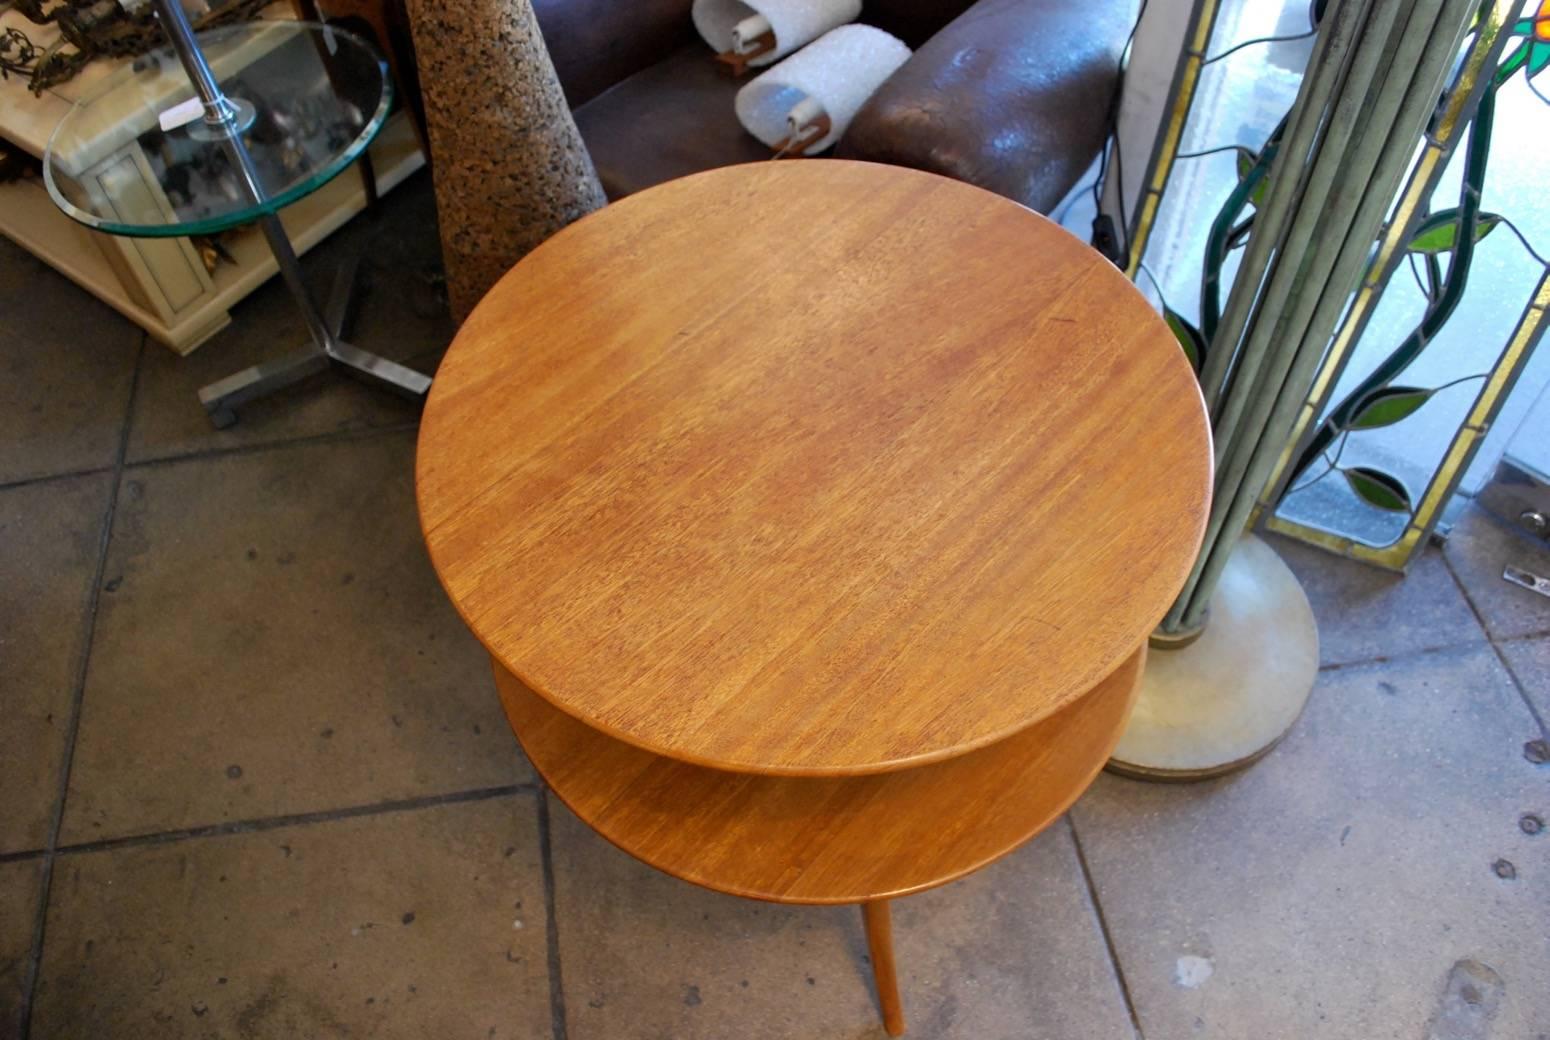 A very nice and elegant pair of  side table by Paul Frankl, made of walnut wood.